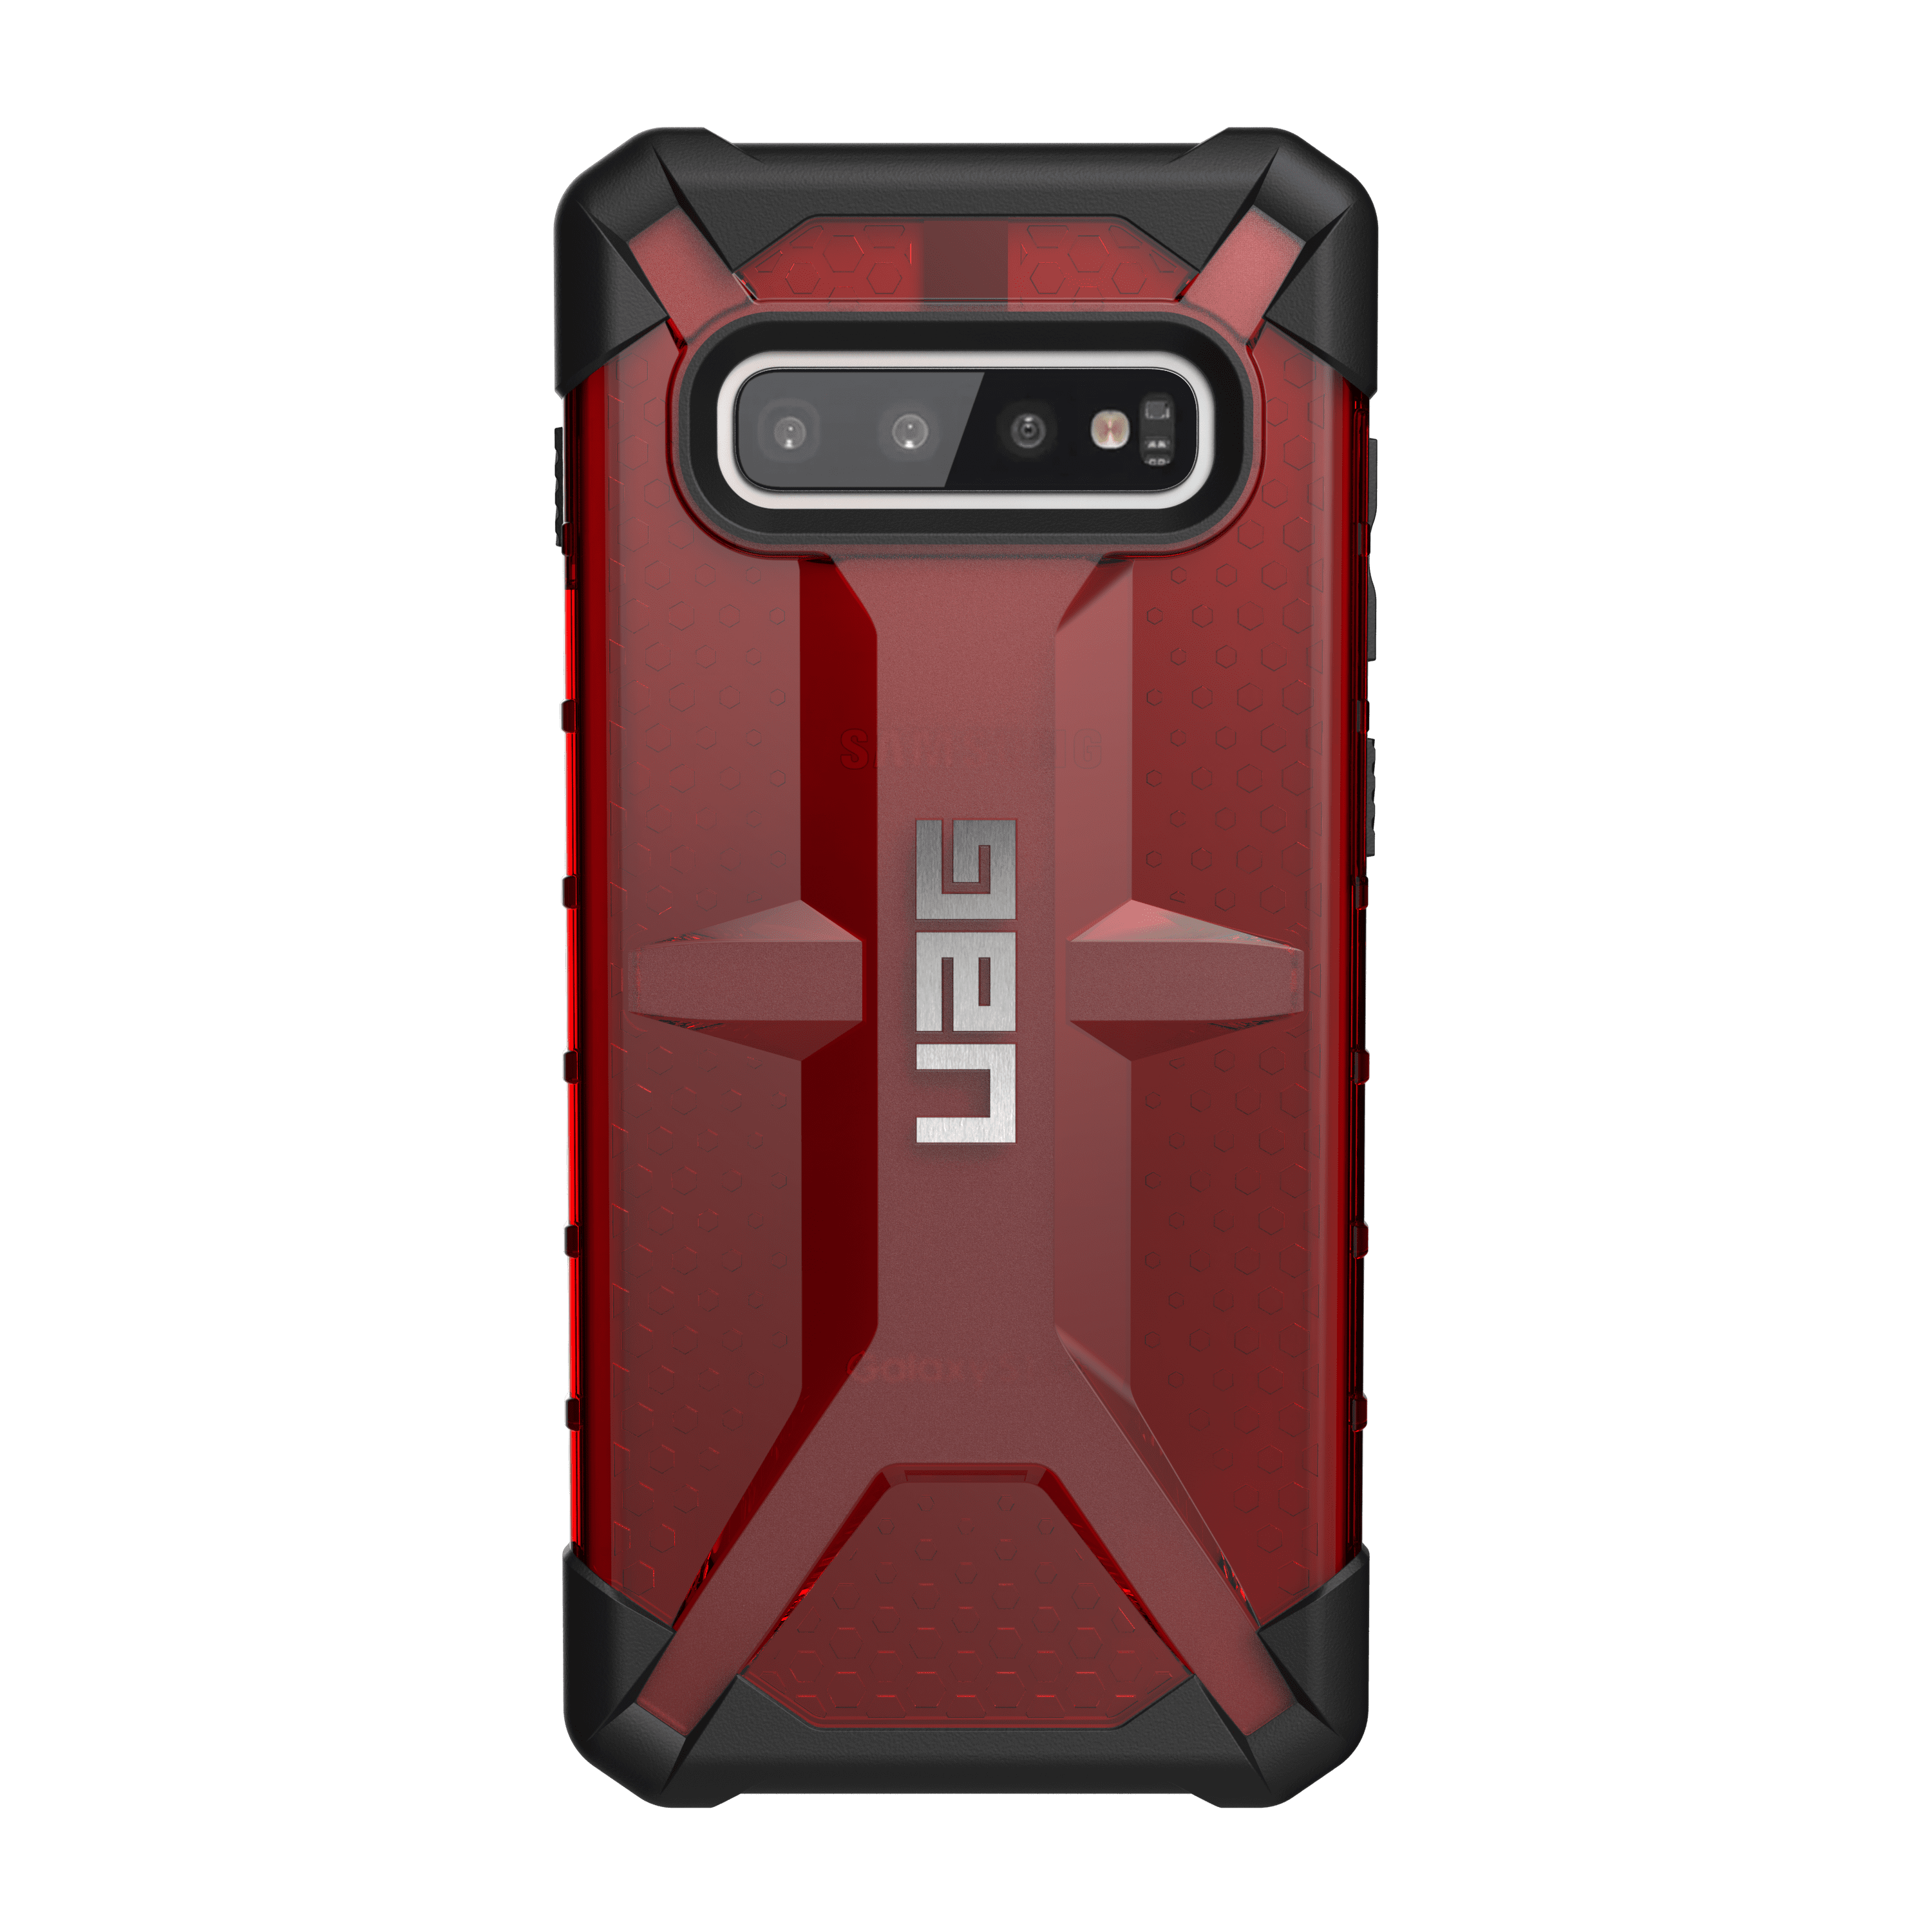 Rugged, Samsung Galaxy S10+ Protective Cases by UAG